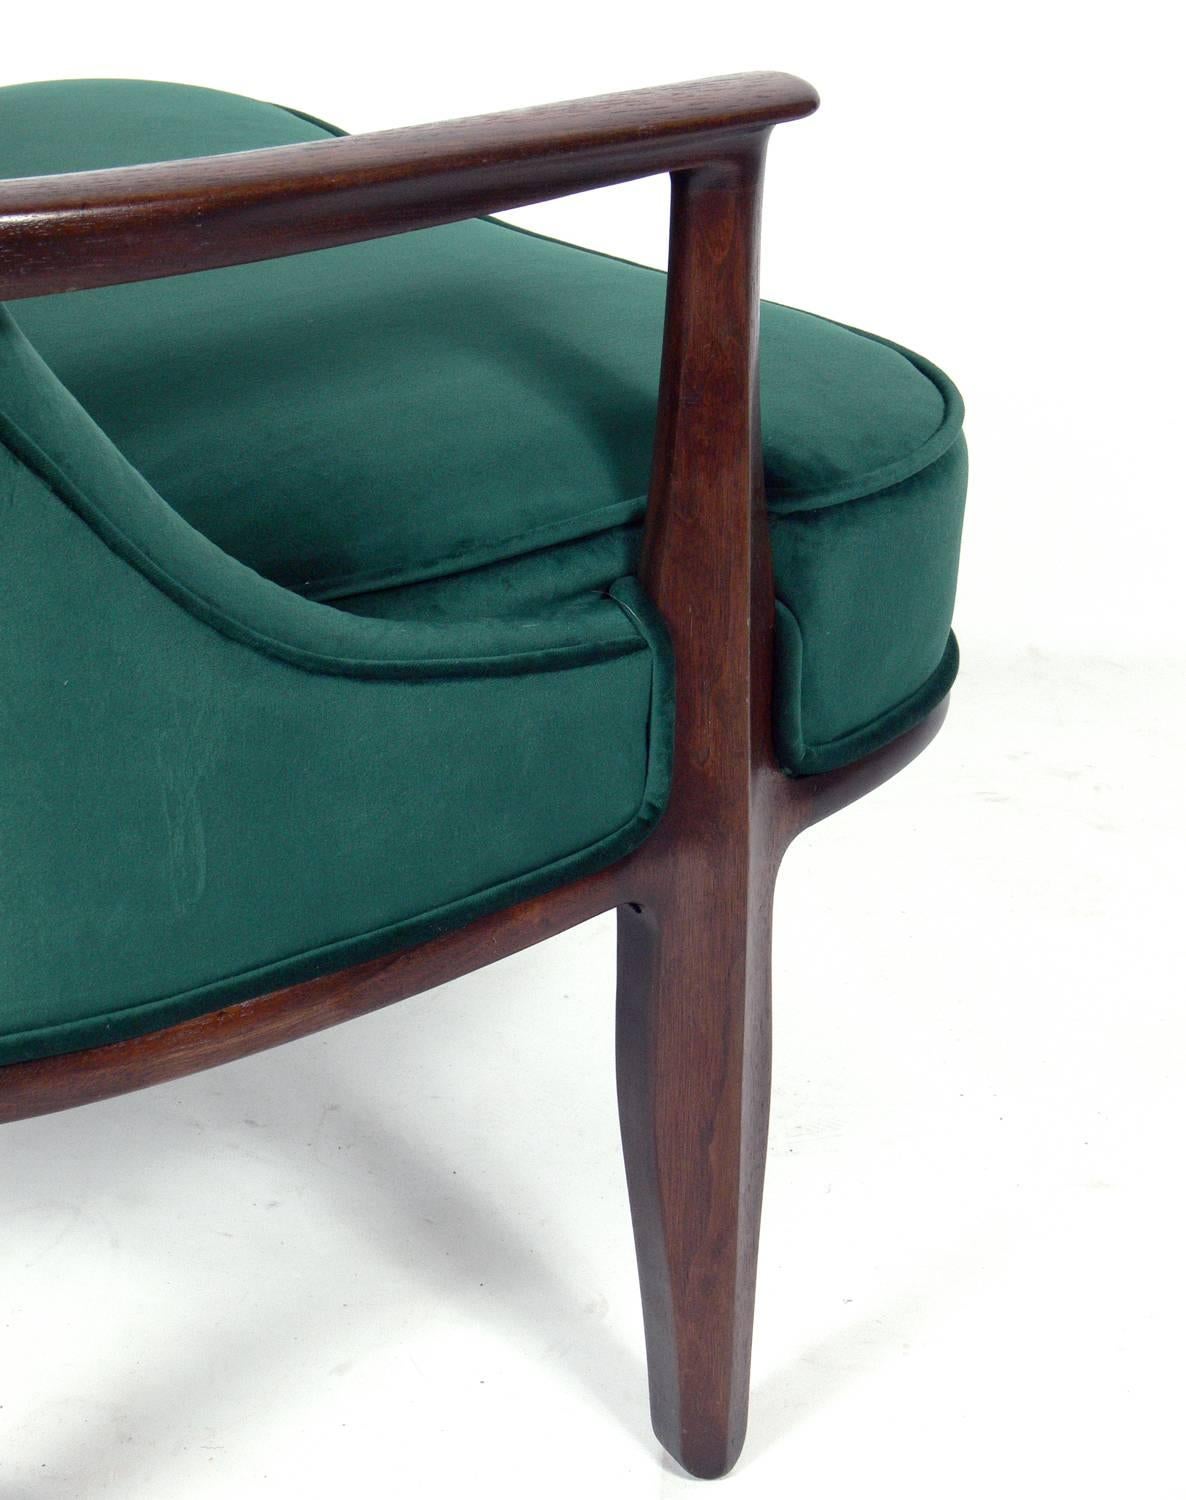 Mid-20th Century Pair of Tufted Lounge Chairs by Edward Wormley for Dunbar